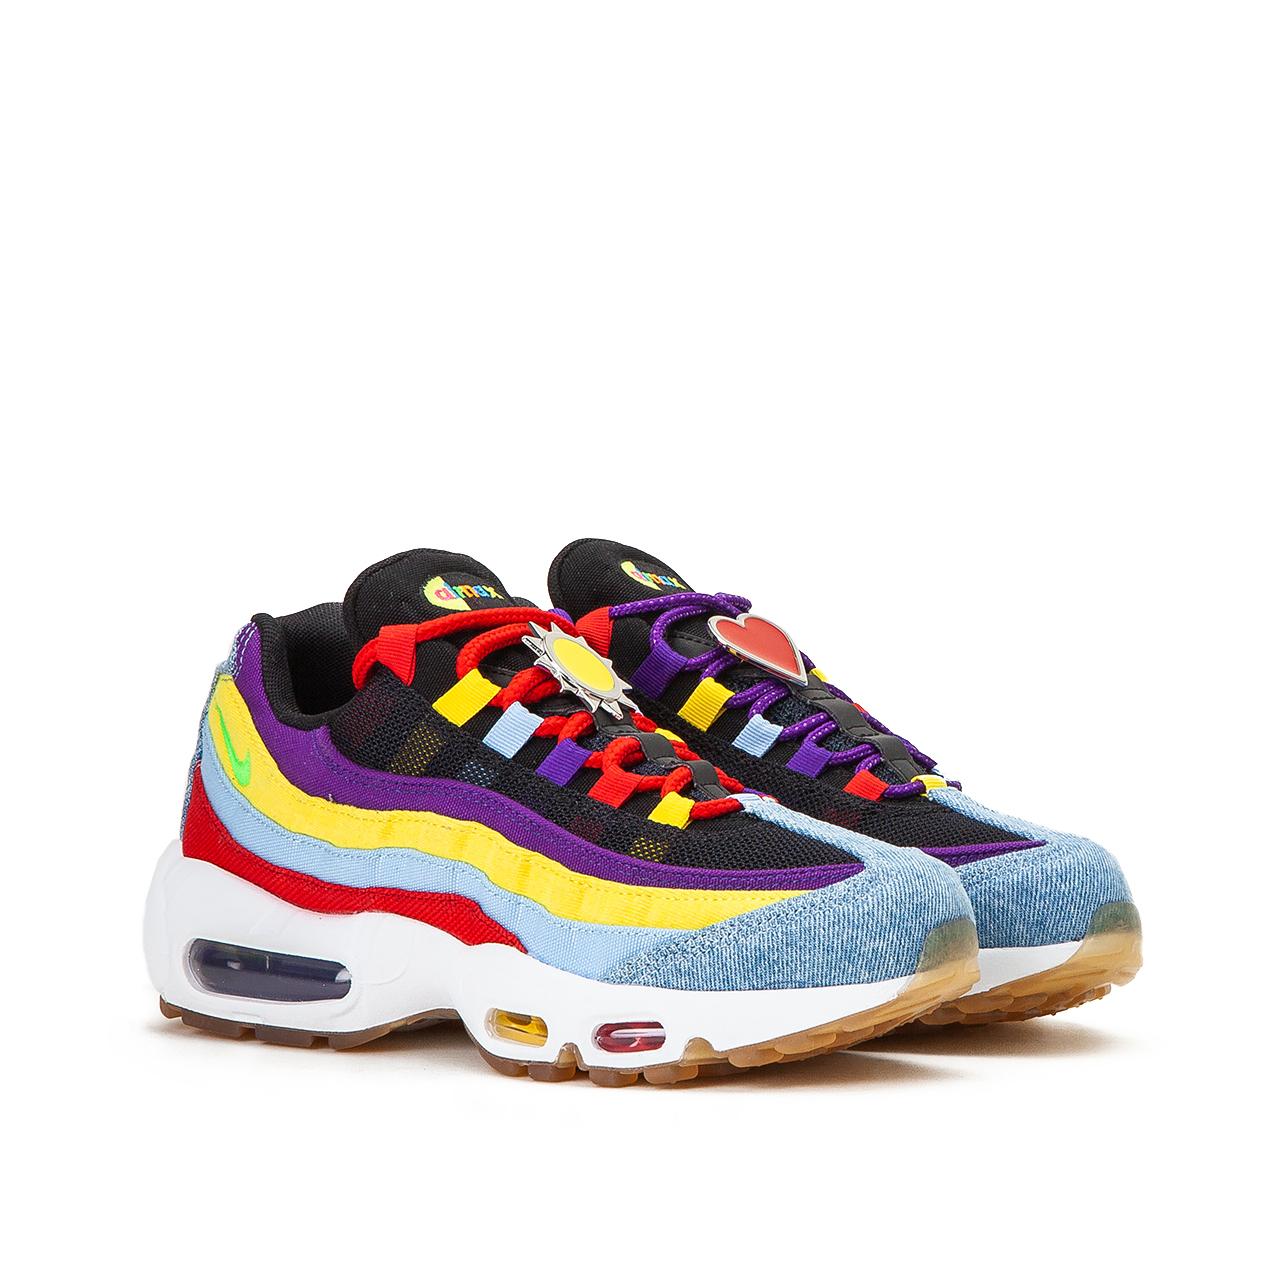 Nike Air Max 95 Sp Shoe in Blue - Save 45% - Lyst